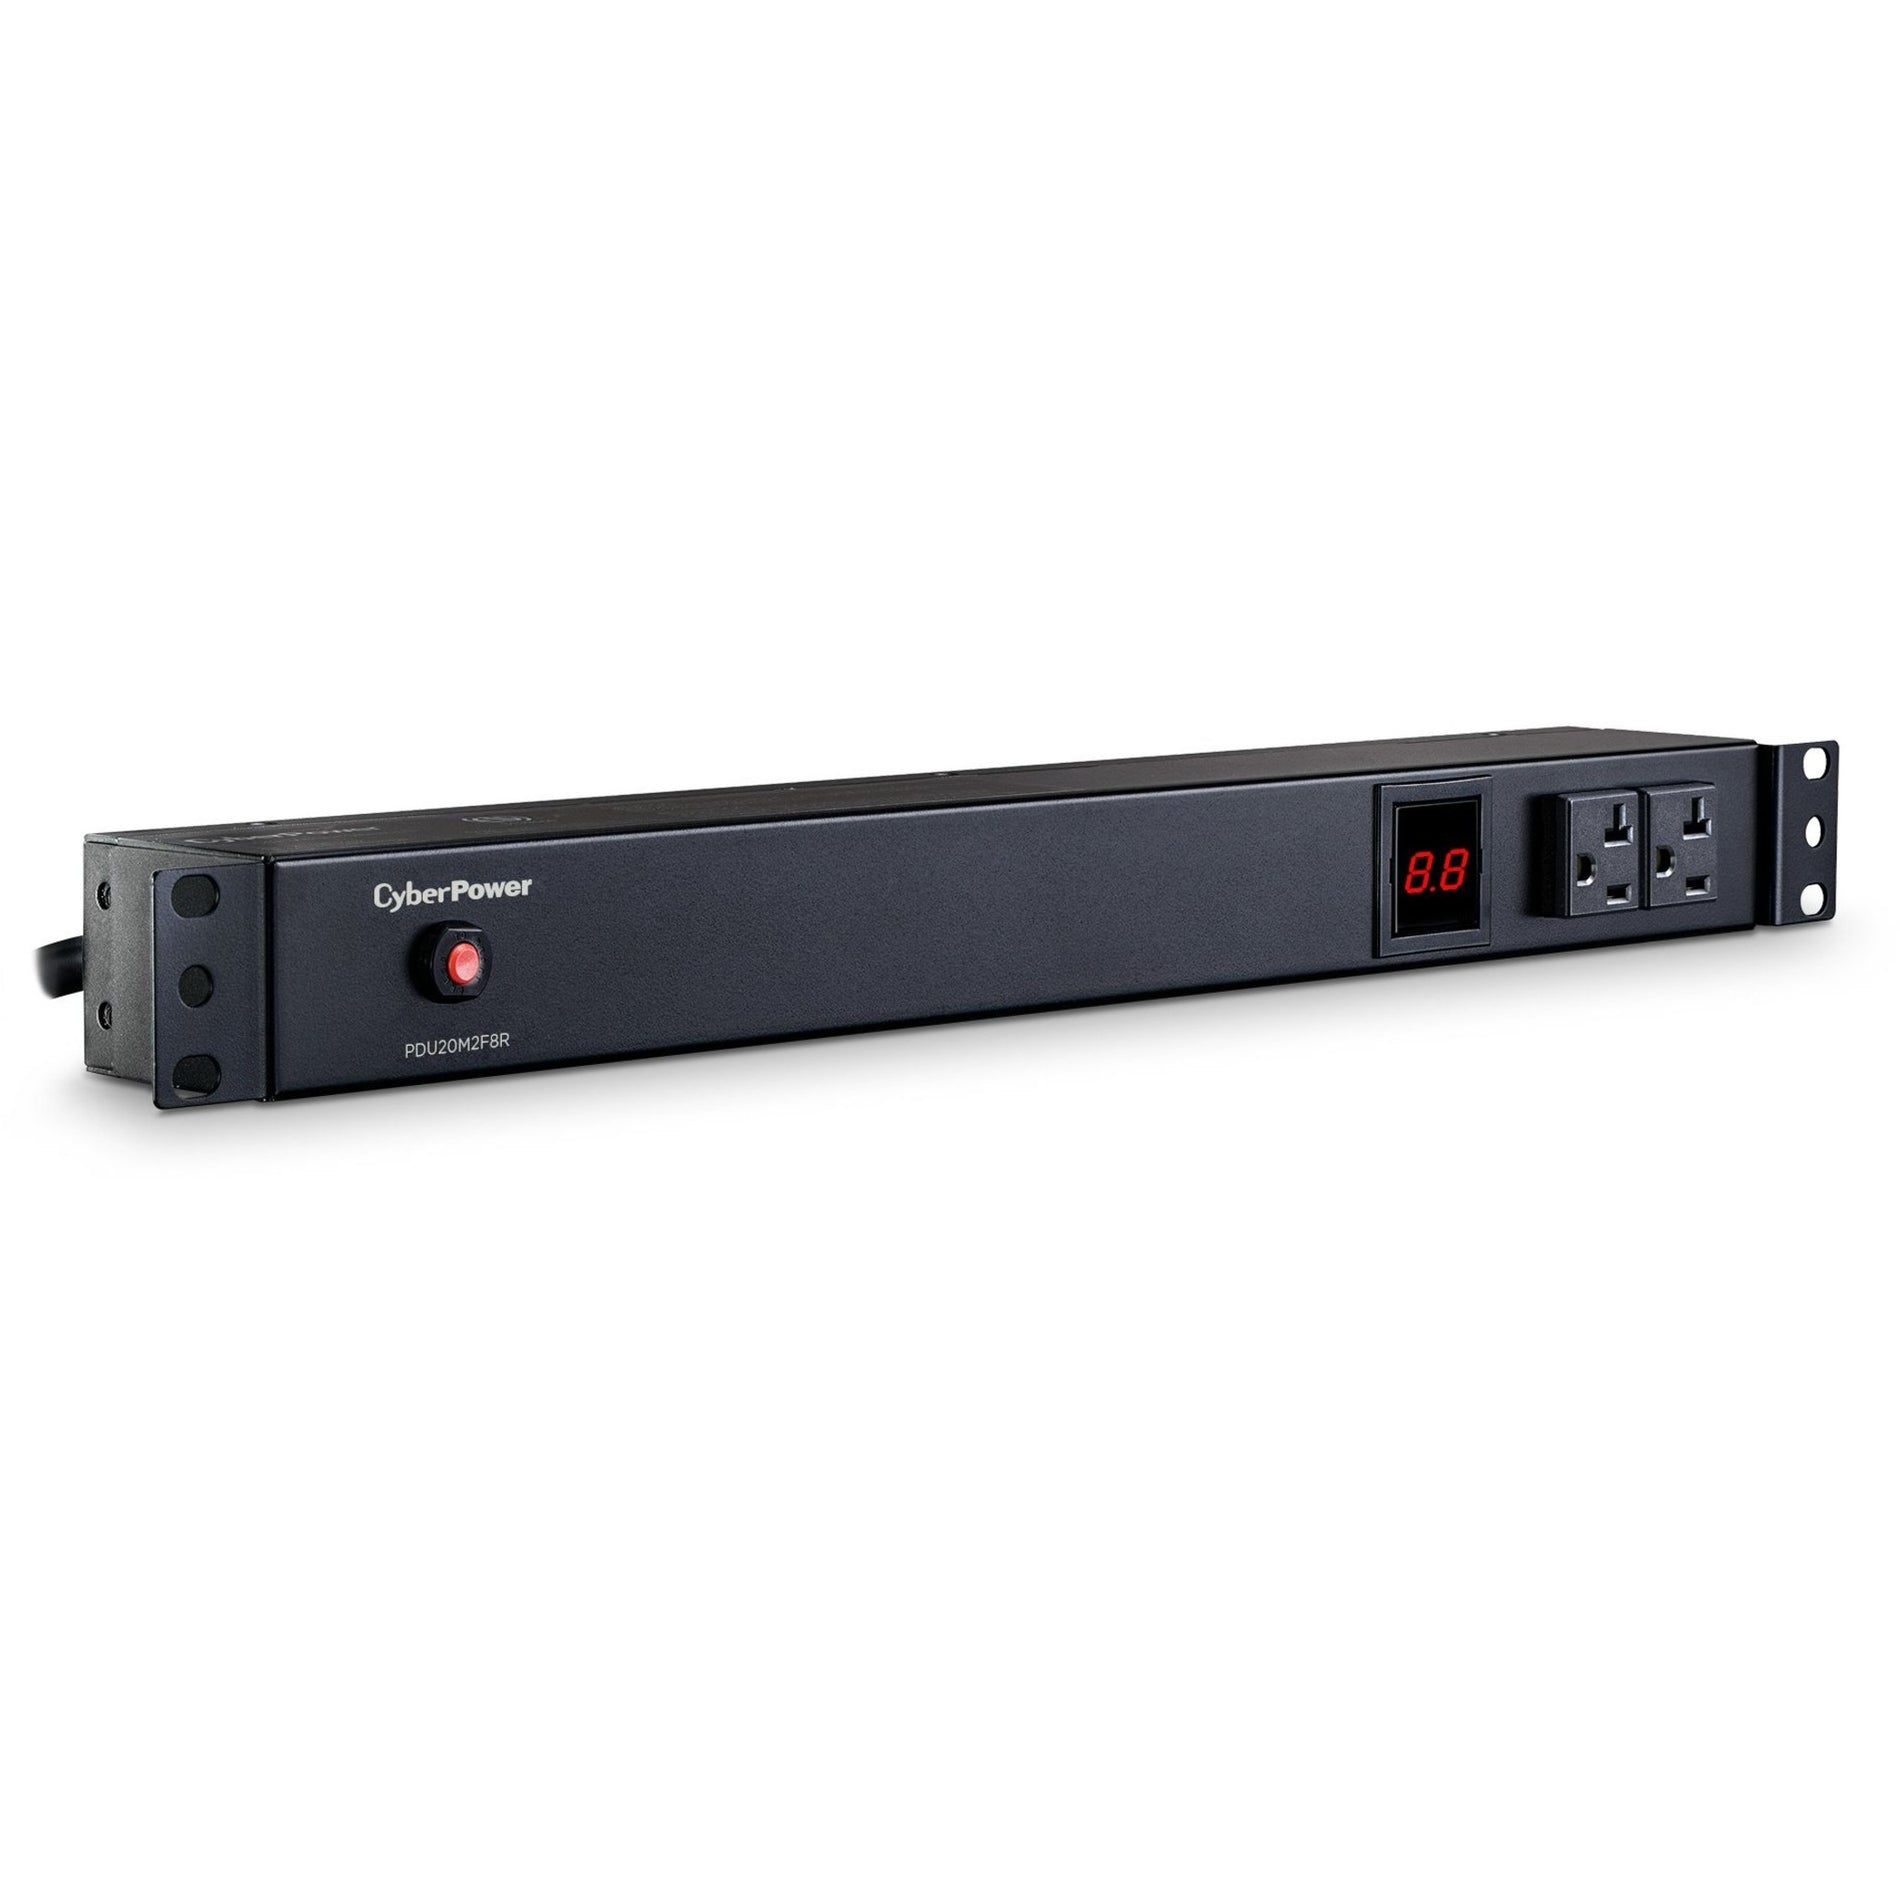 CyberPower PDU20M2F8R Metered PDU, 10-Outlets, 20A, 120V AC, Rack-mountable